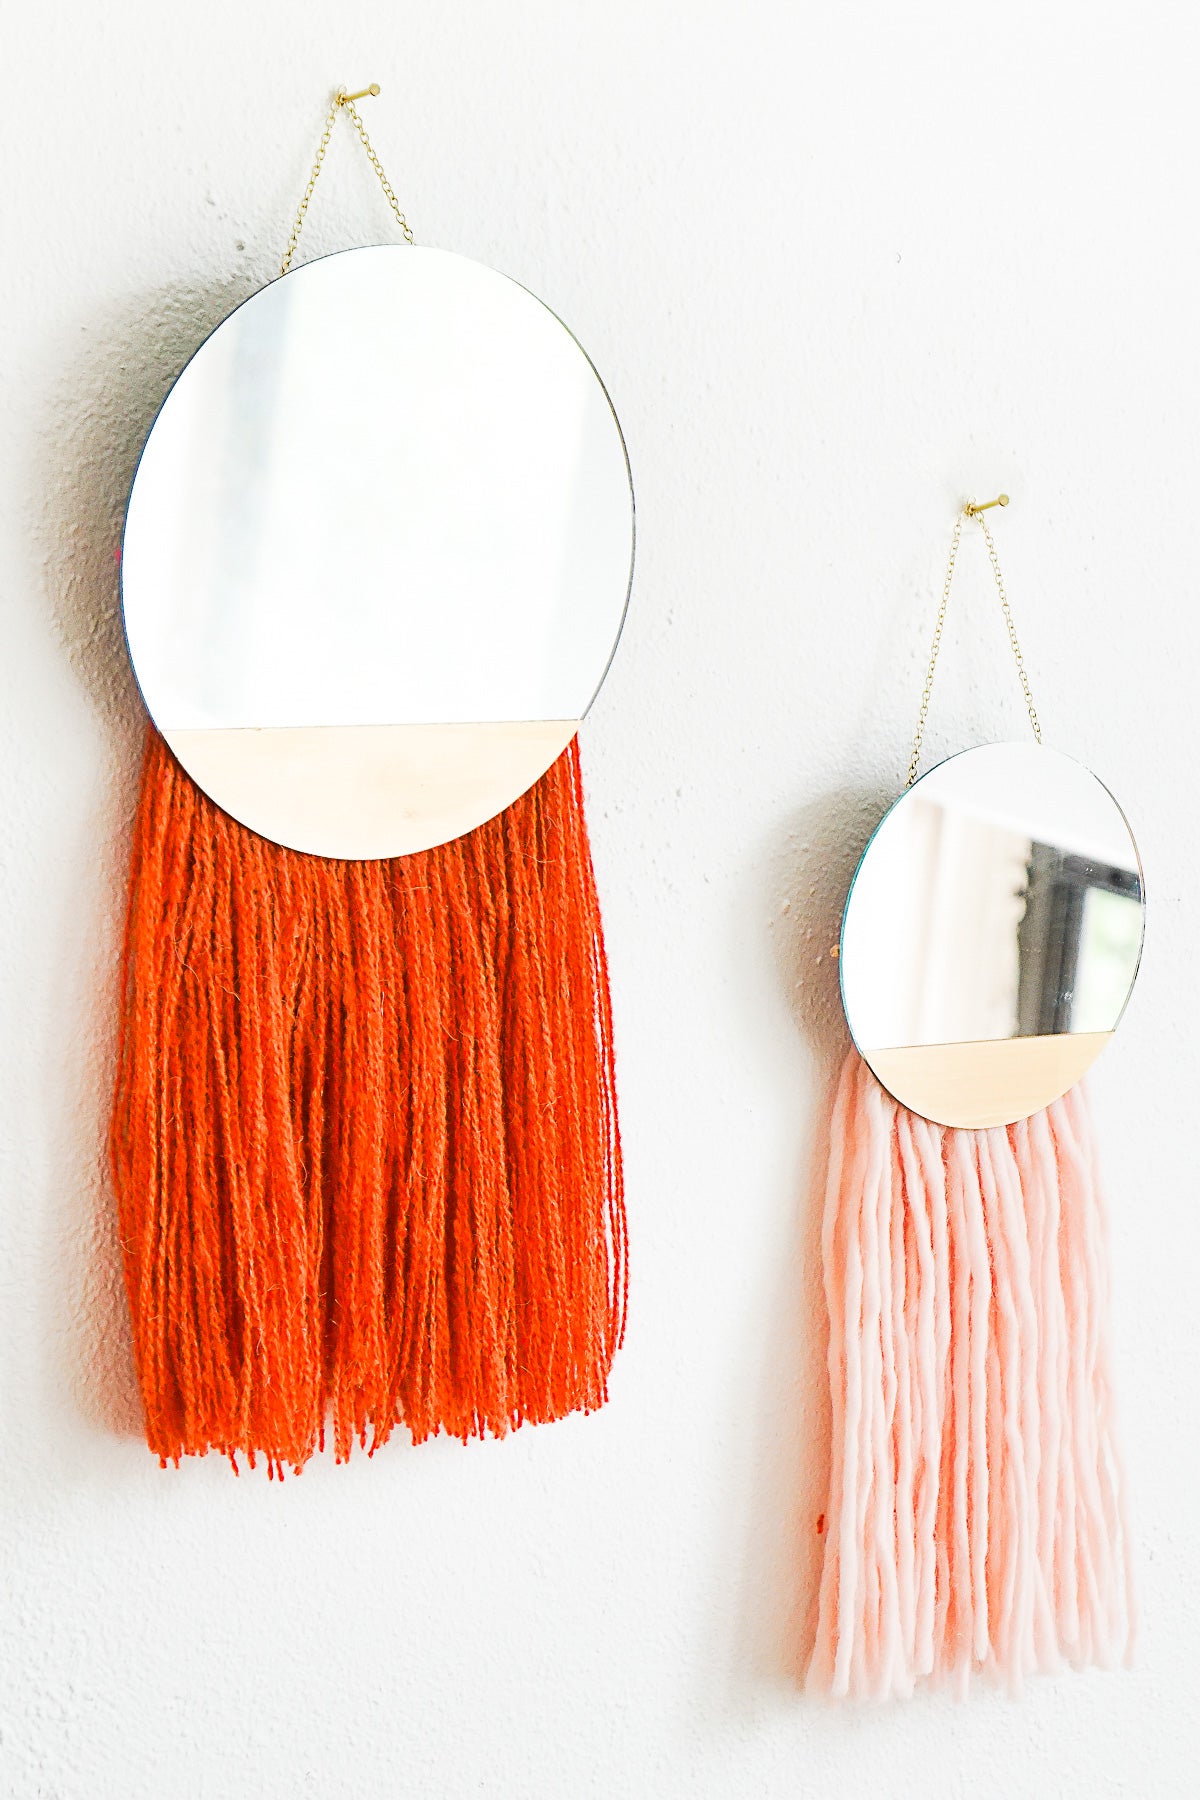 12 Insanely Easy Mirror DIYs That Will Transform Your Space